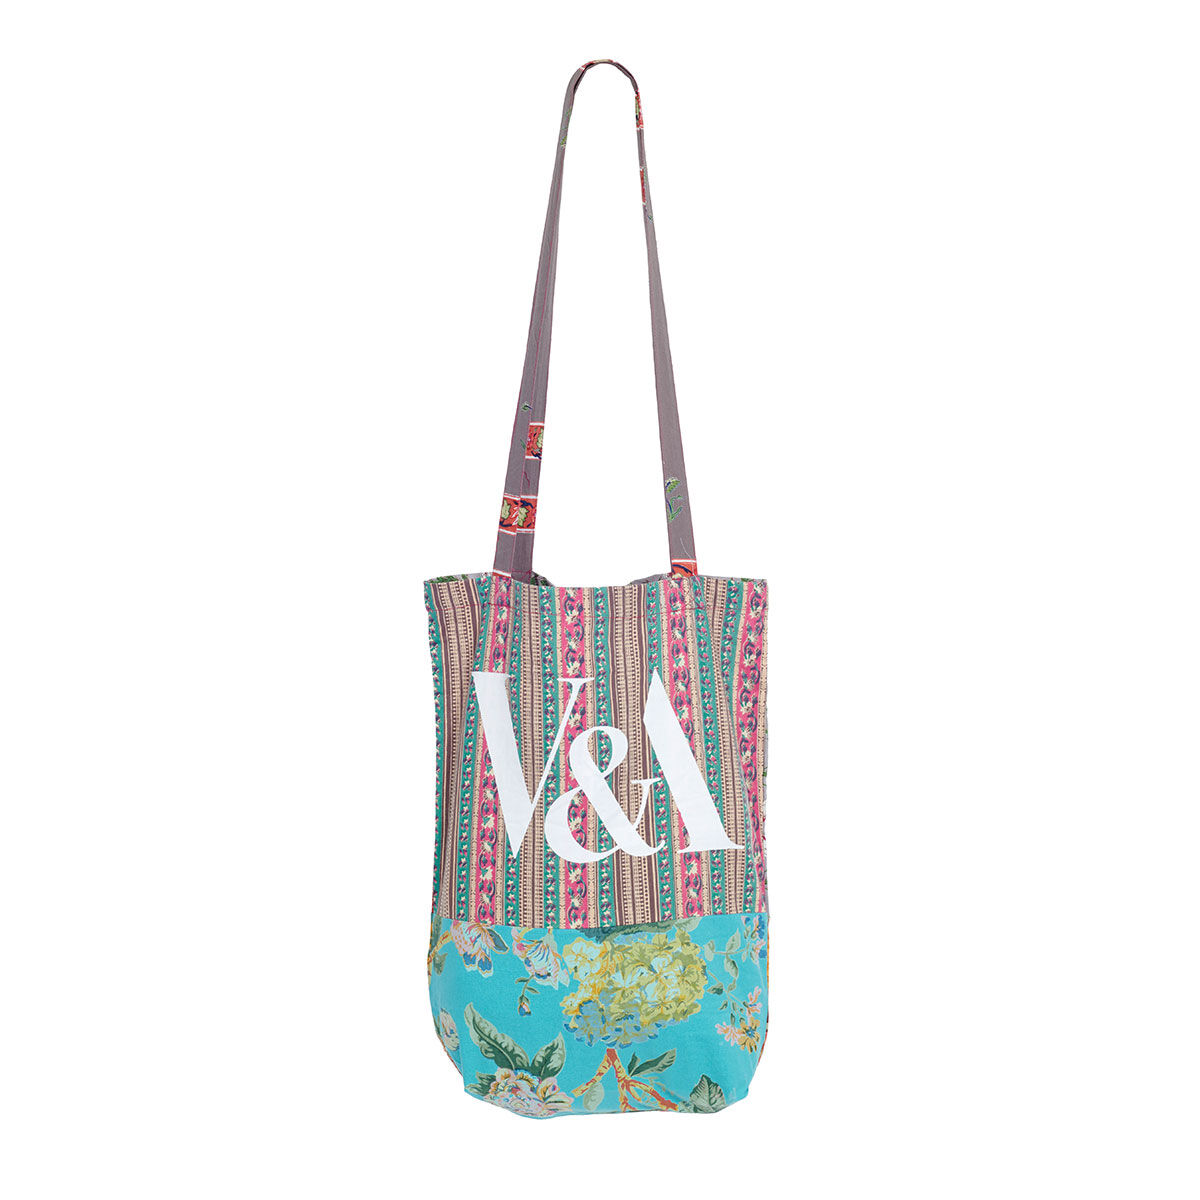 Fabric Of India Tote Bag | Offcut Crafted Bag | V&A Shop